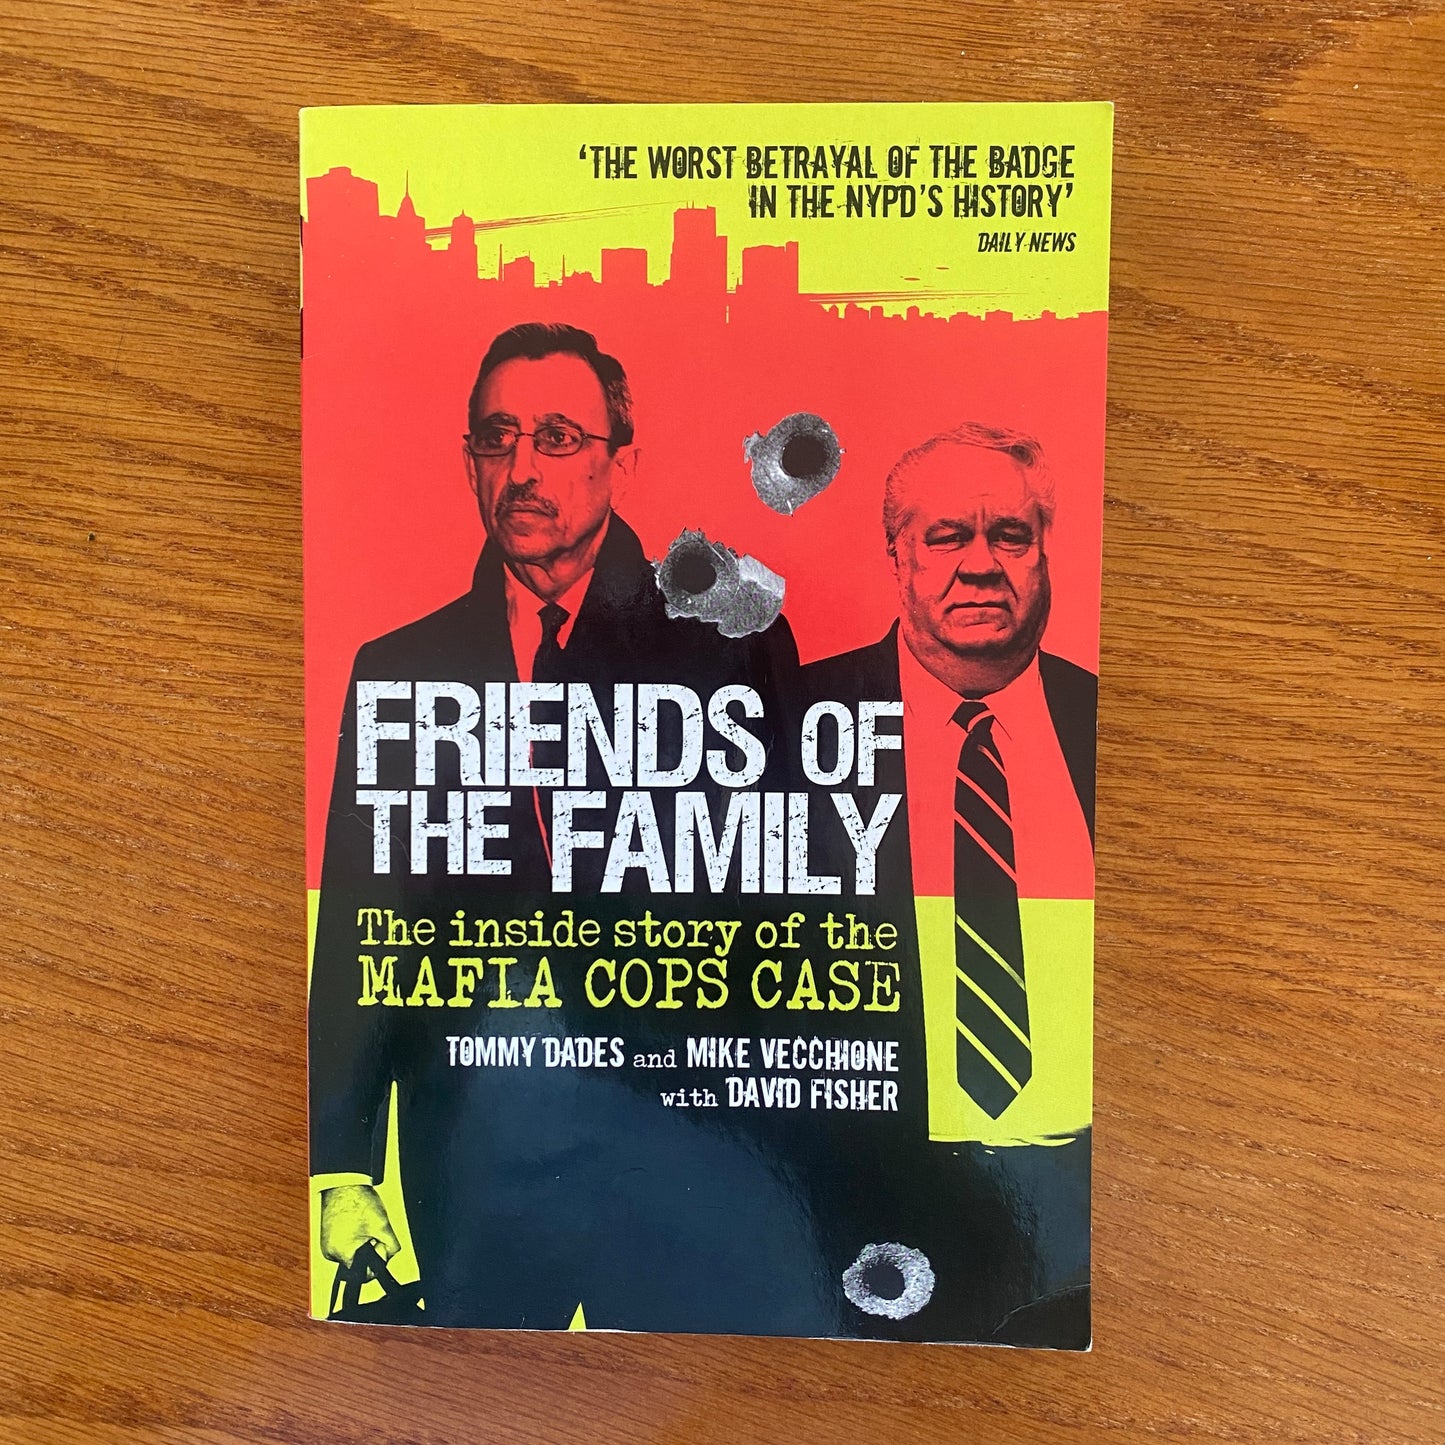 Friends of the Family: The Inside Story of the Mafia Cops Case - Tommy Dades, Mike Vecchione & David Fisher